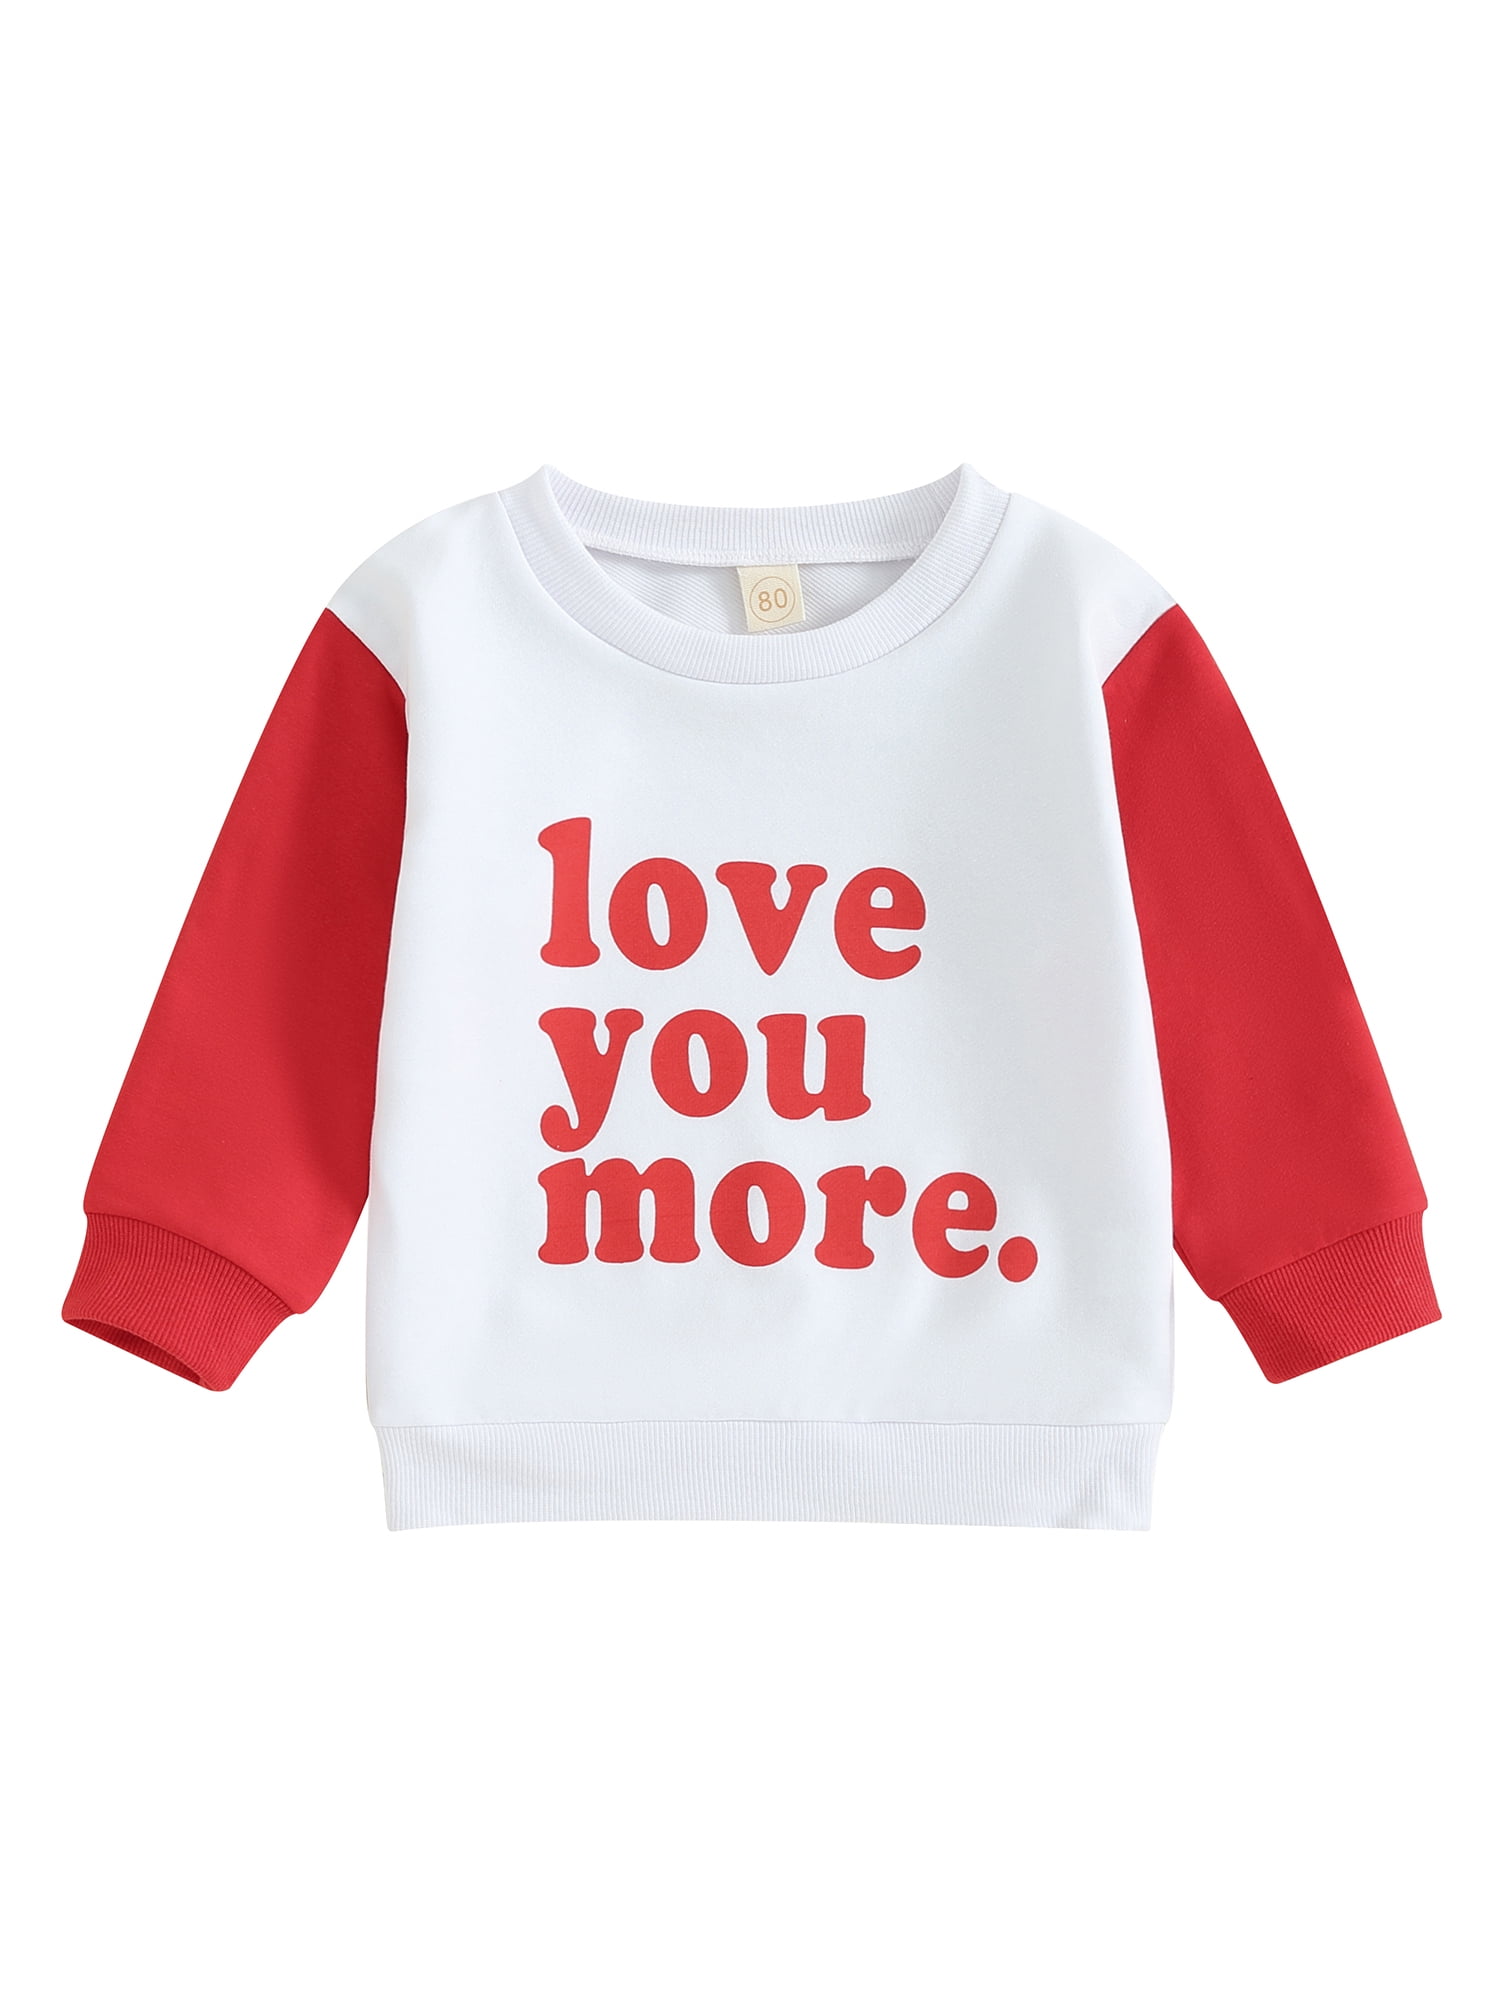 Canis Infant Baby Boy Girl Valentine's Day Clothes Sweatshirt T-Shirt ...